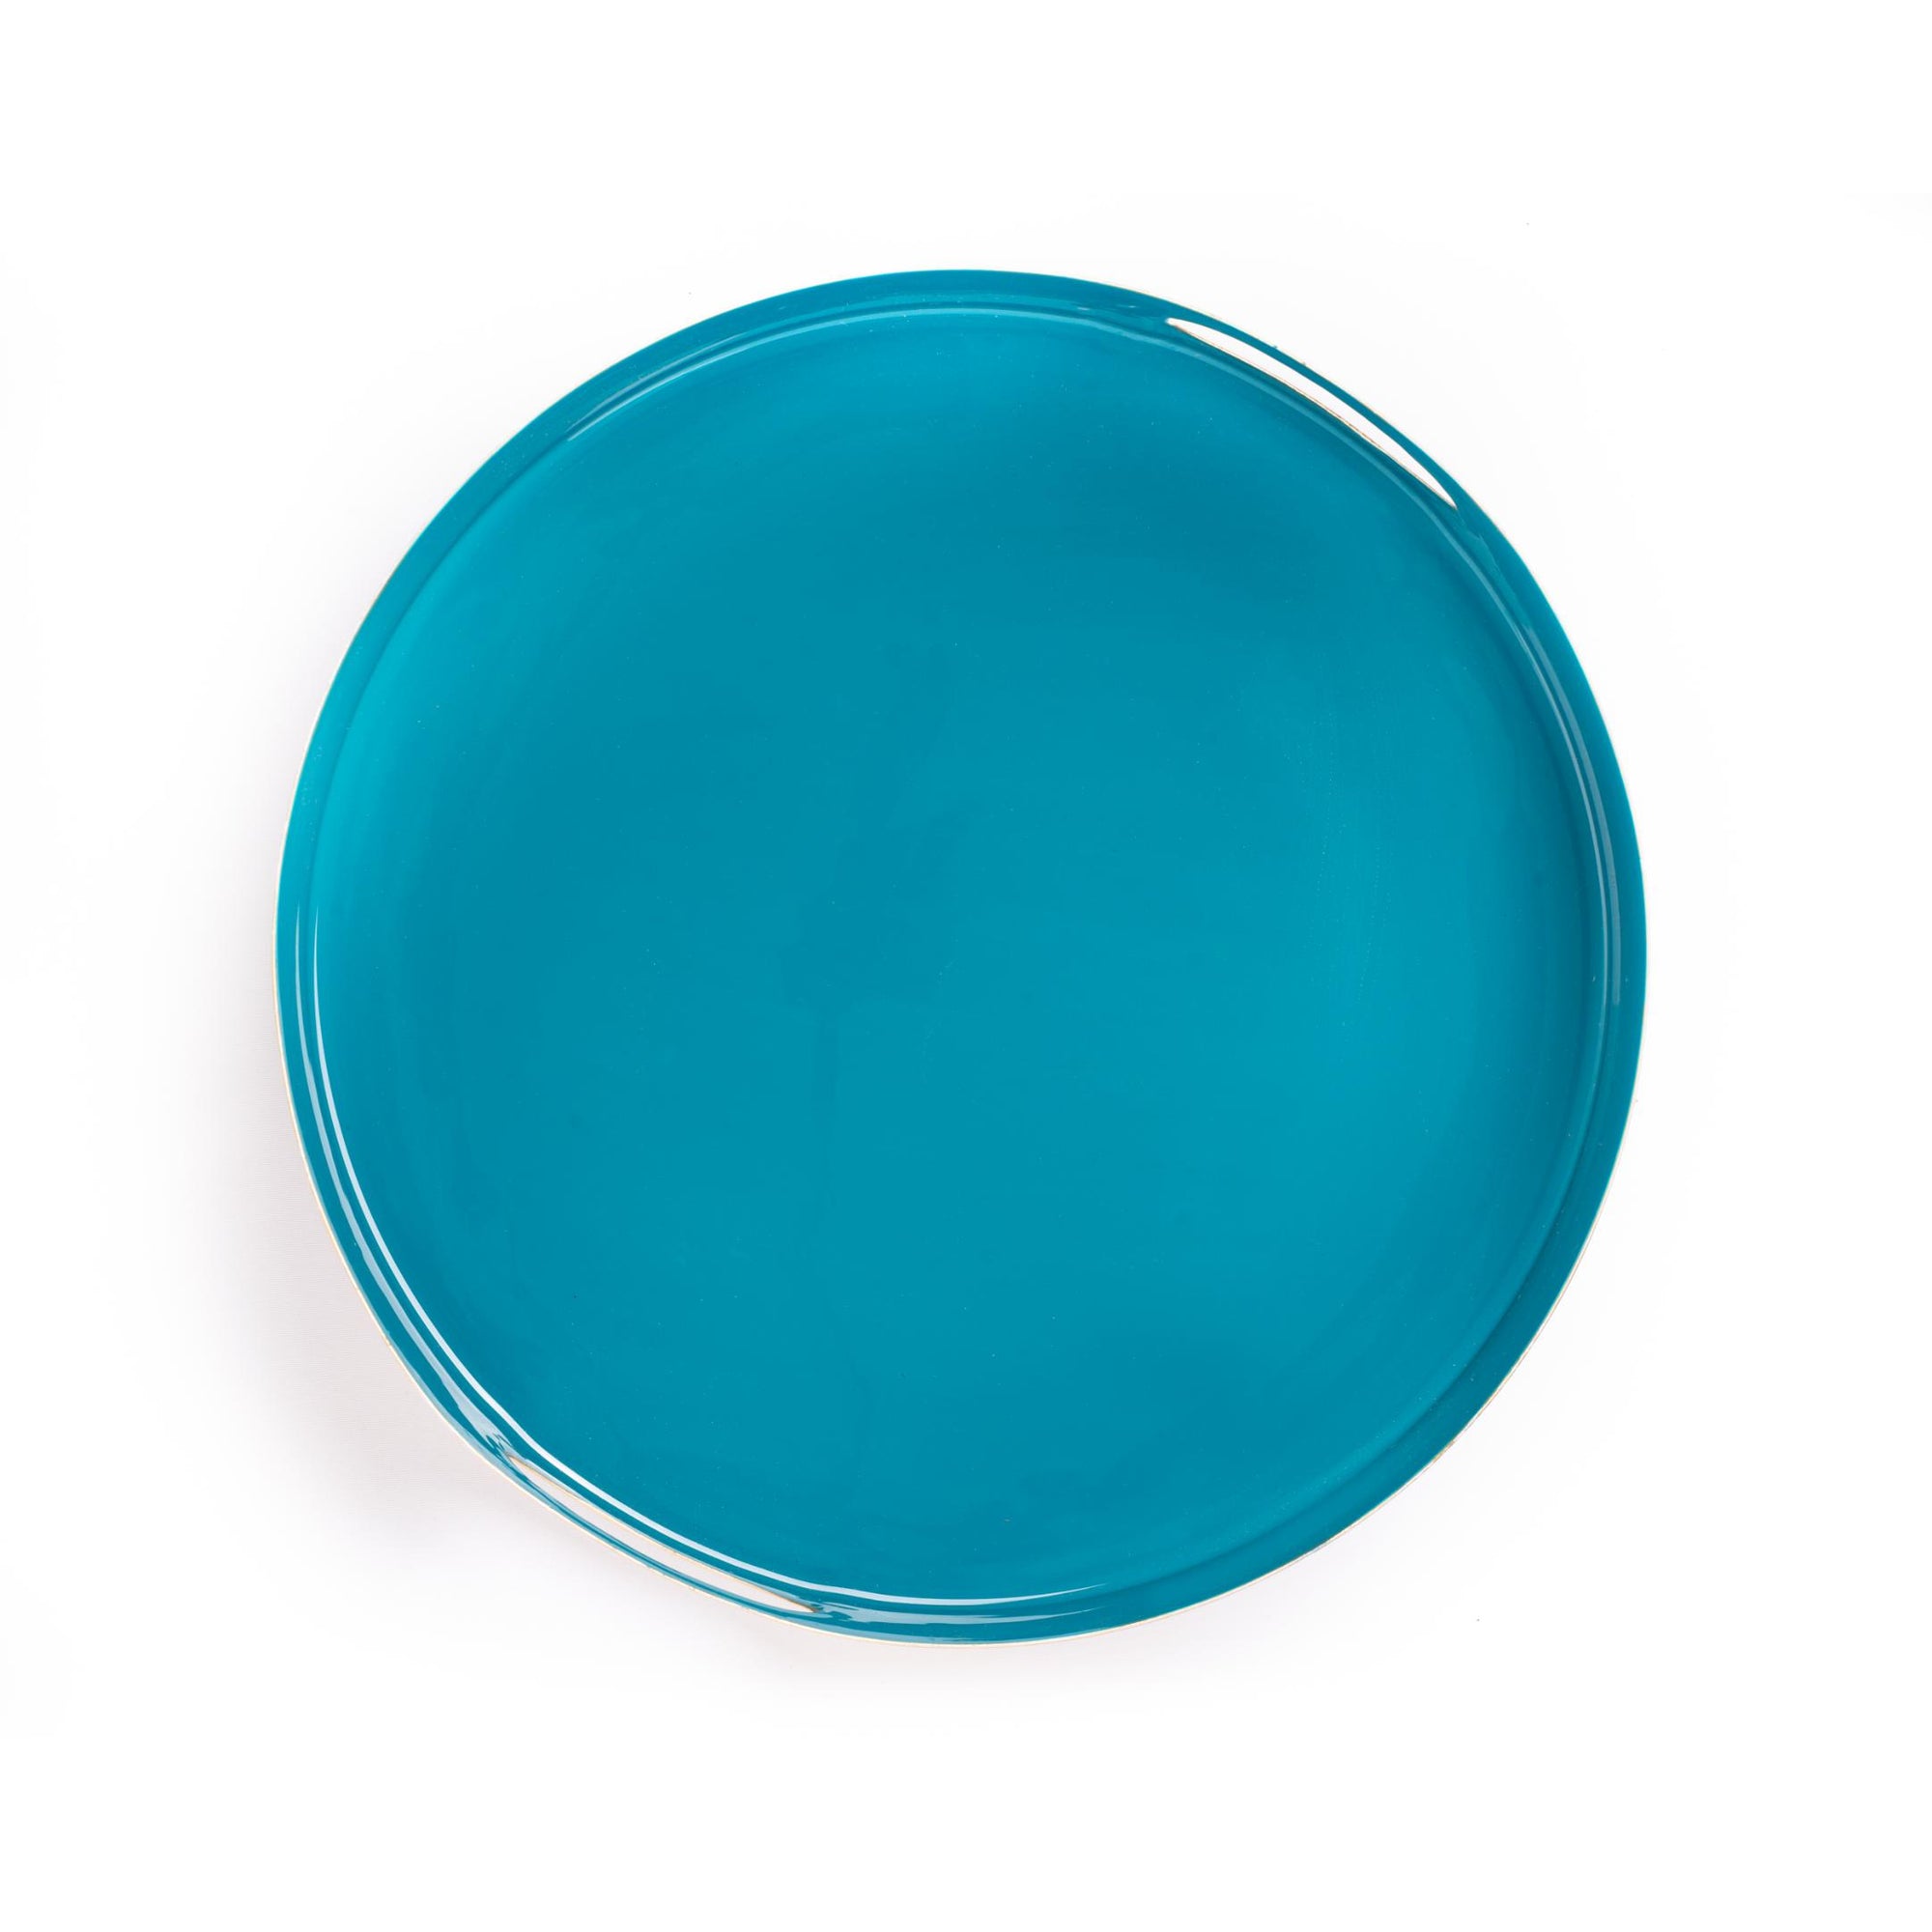 Metal Tray - Solid Blue Round